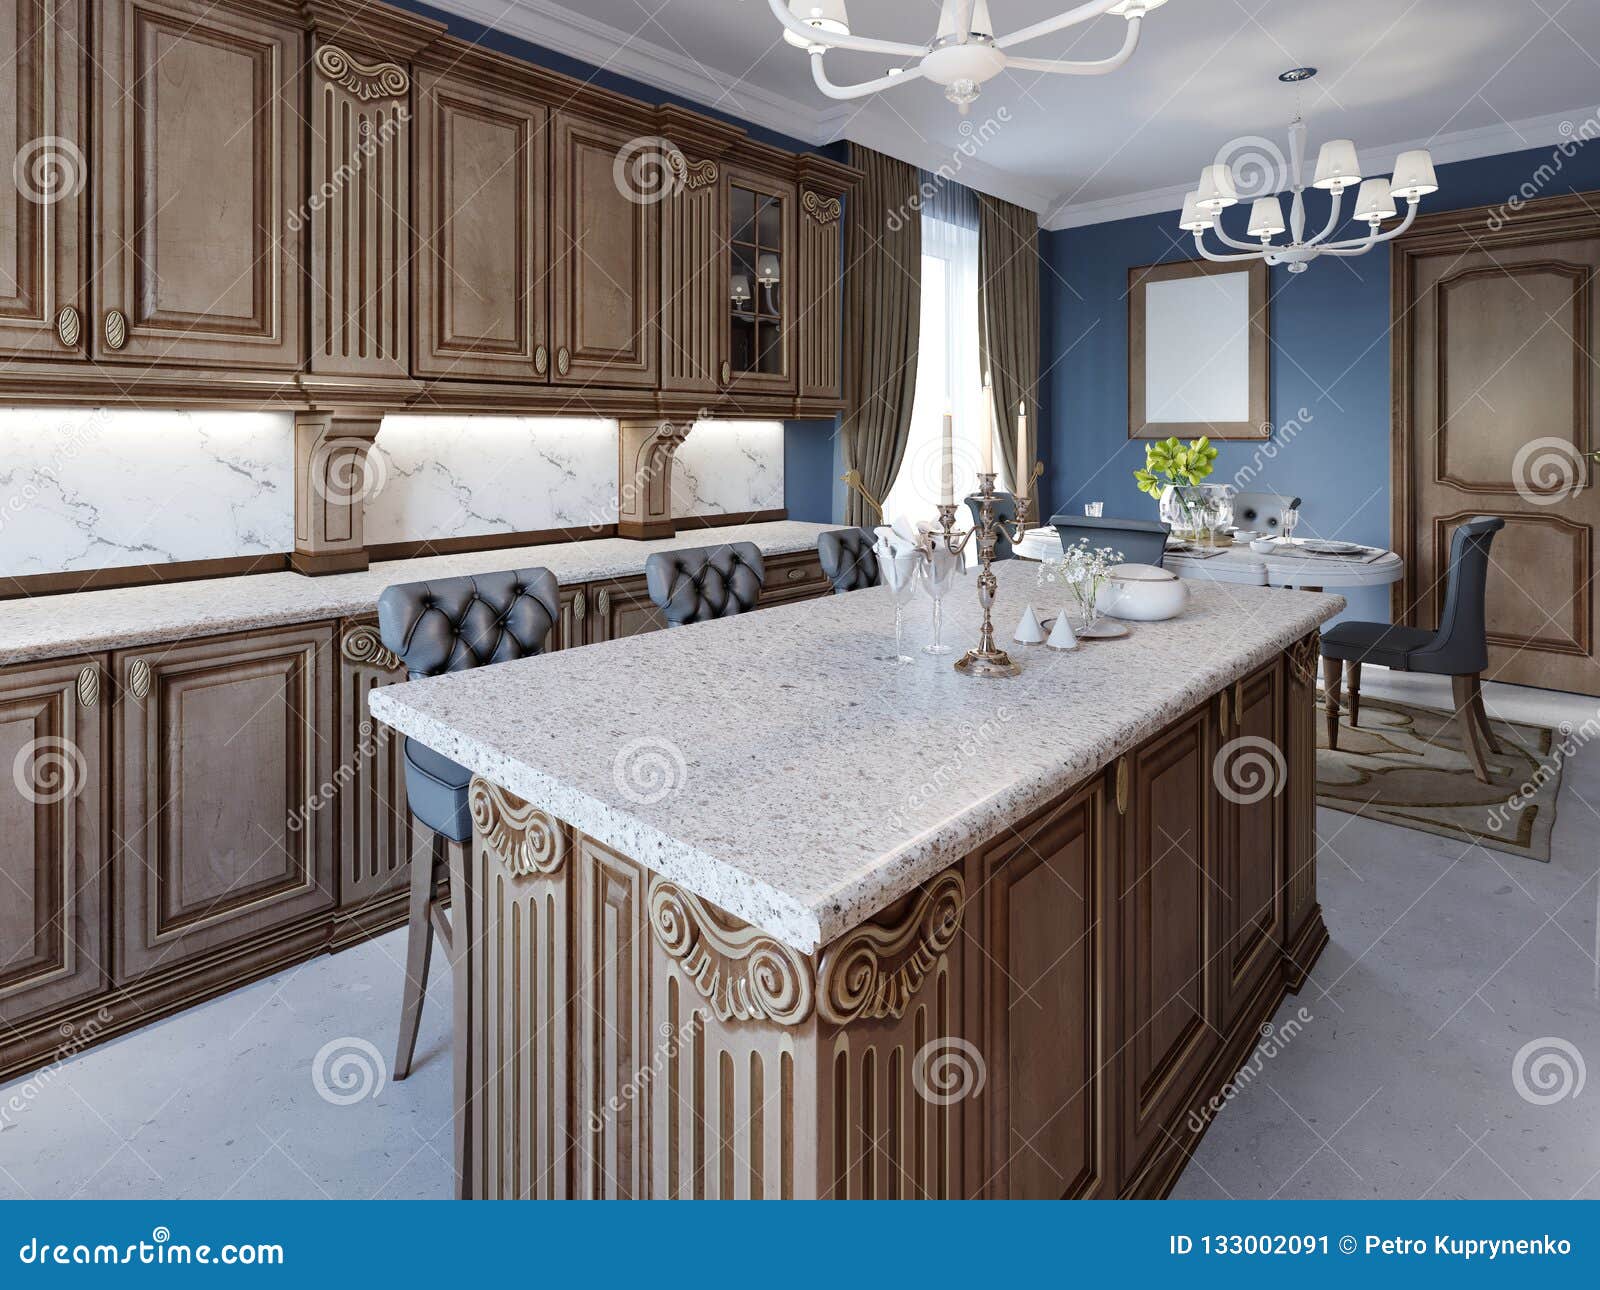 Kitchen With Granite Island And Cherry Wood Cabinetry Stock